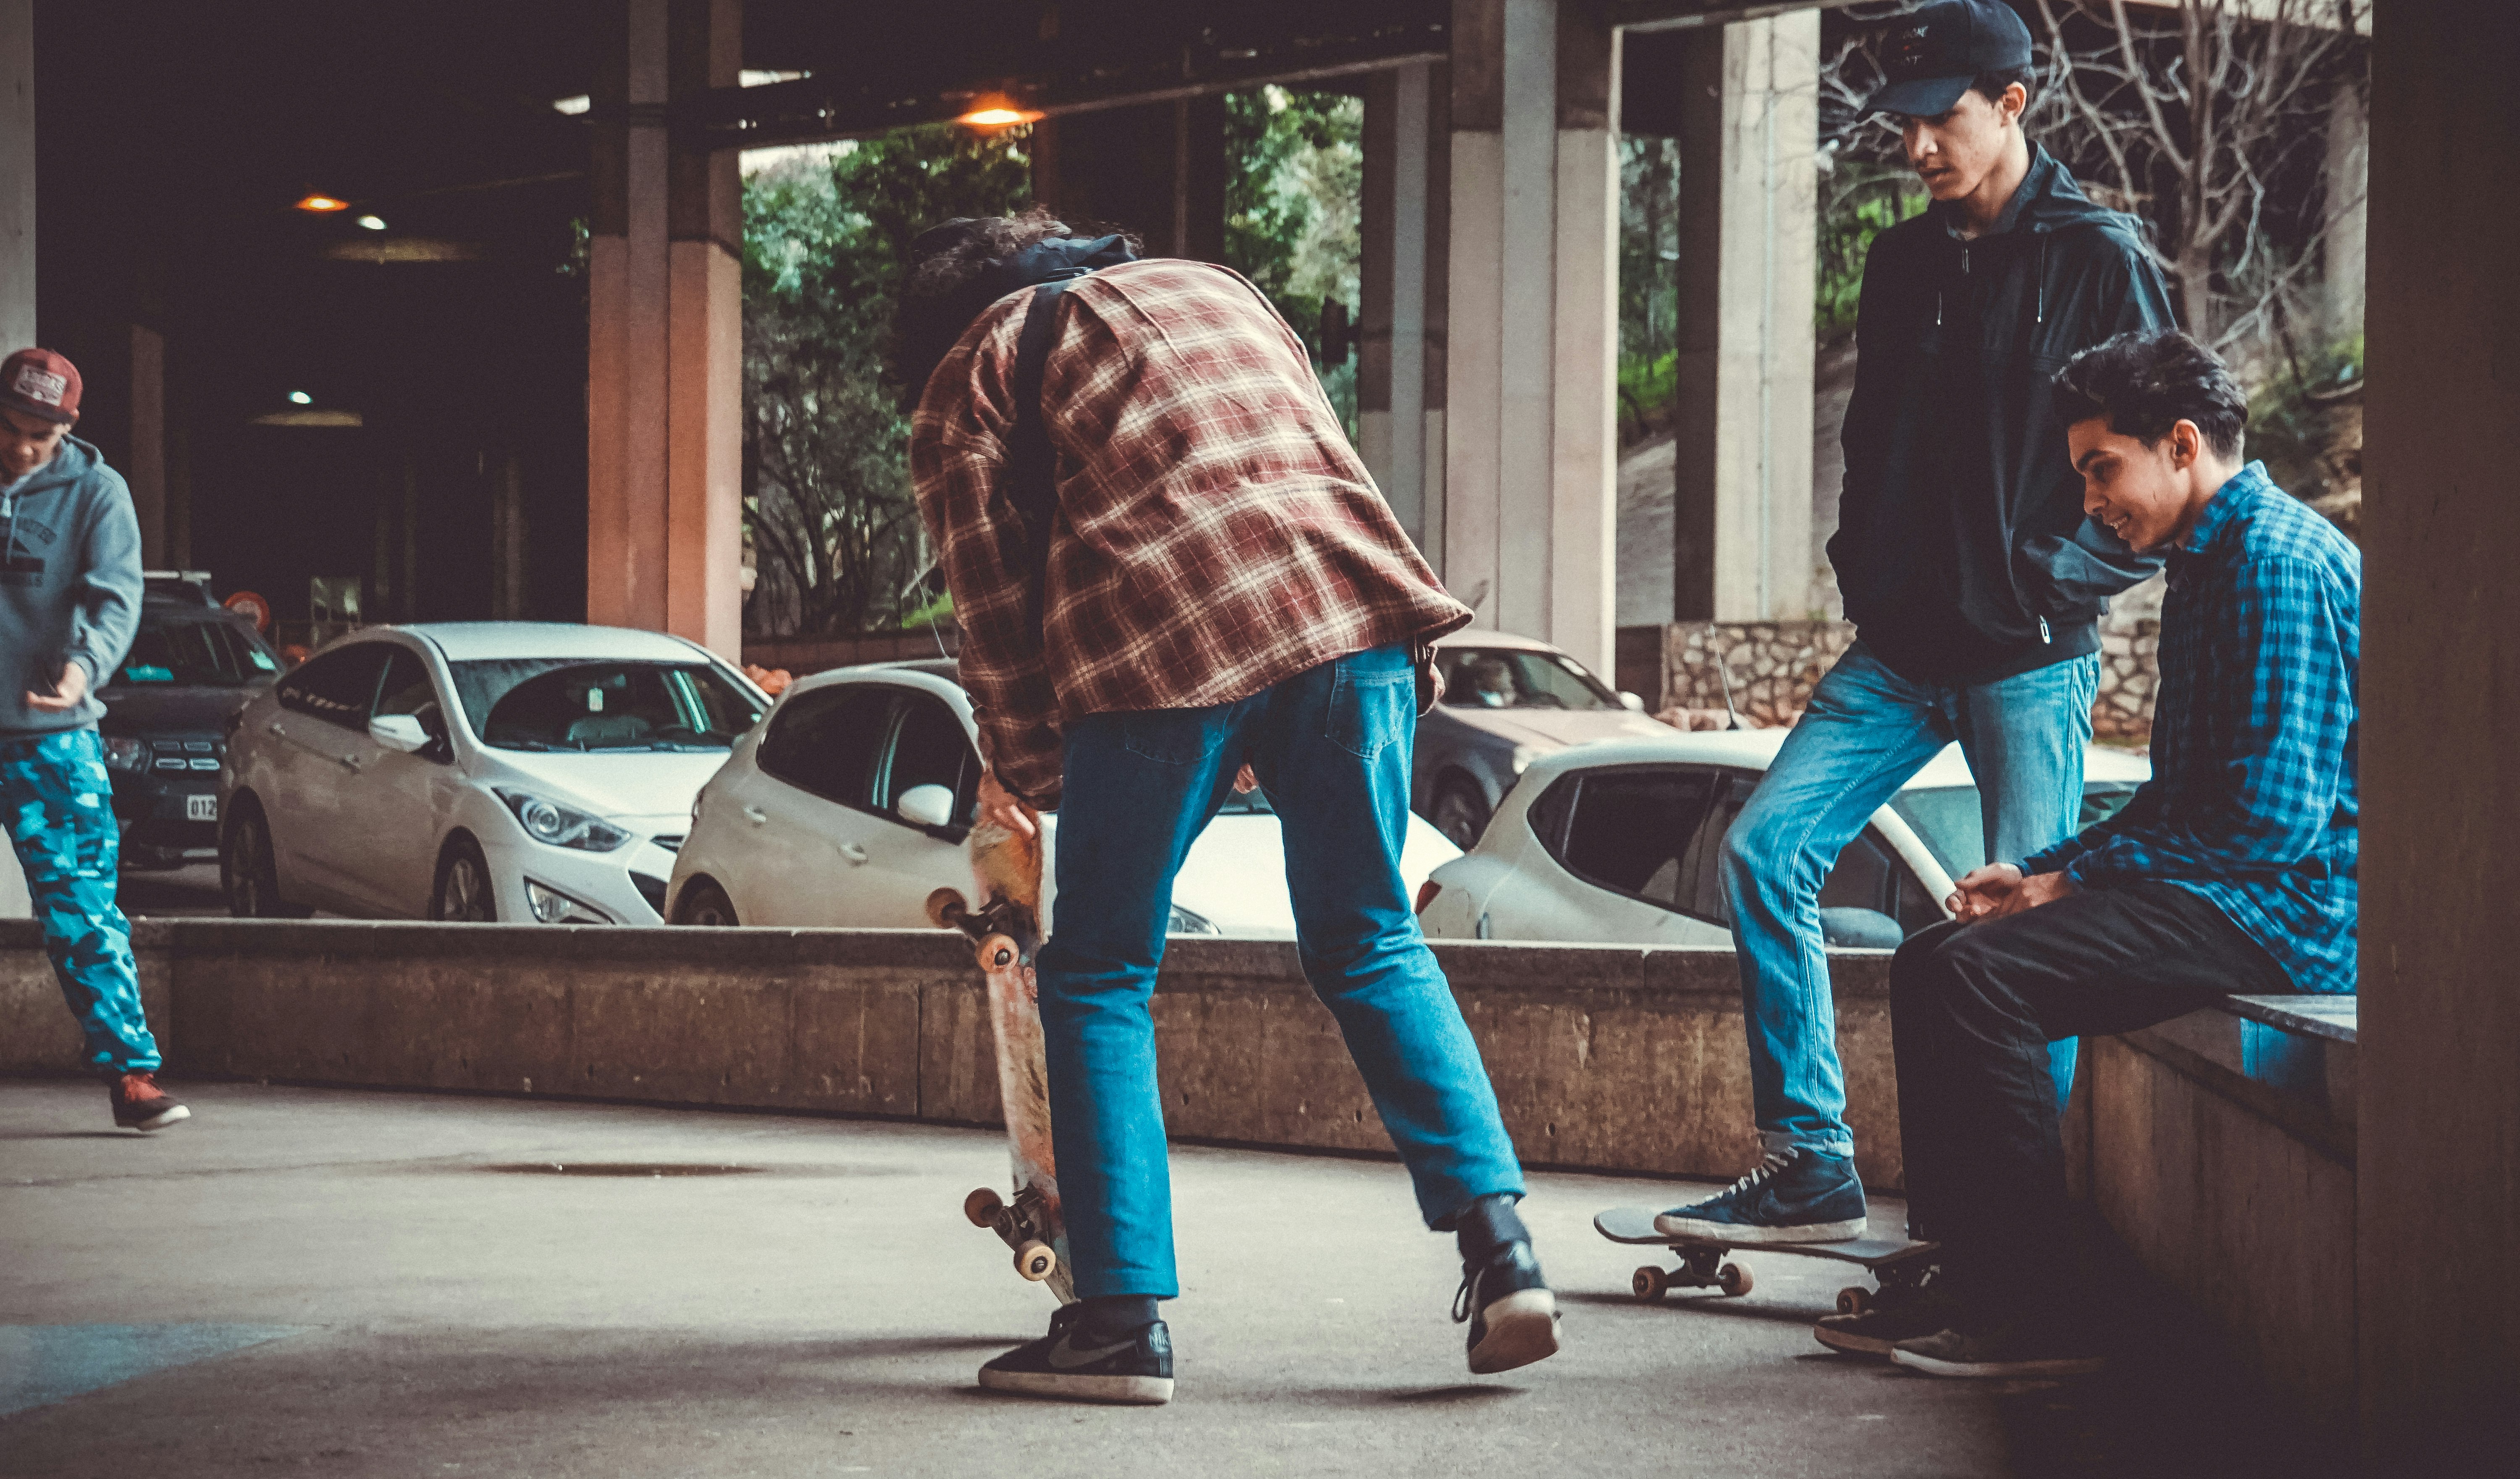 man holding skateboard while standing near another three men